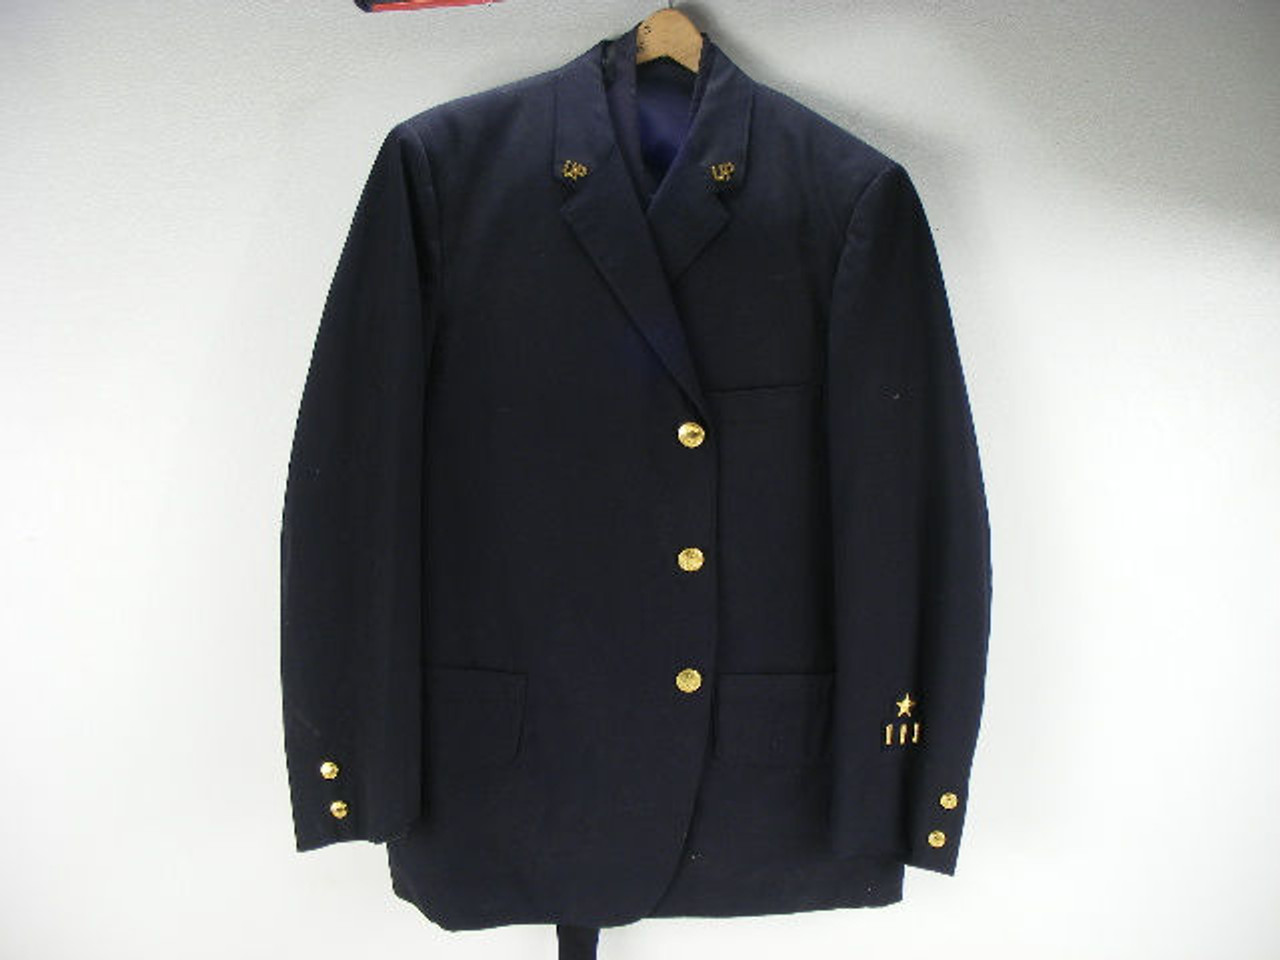 This is a complete vintage Union Pacific conductor uniform made by ...